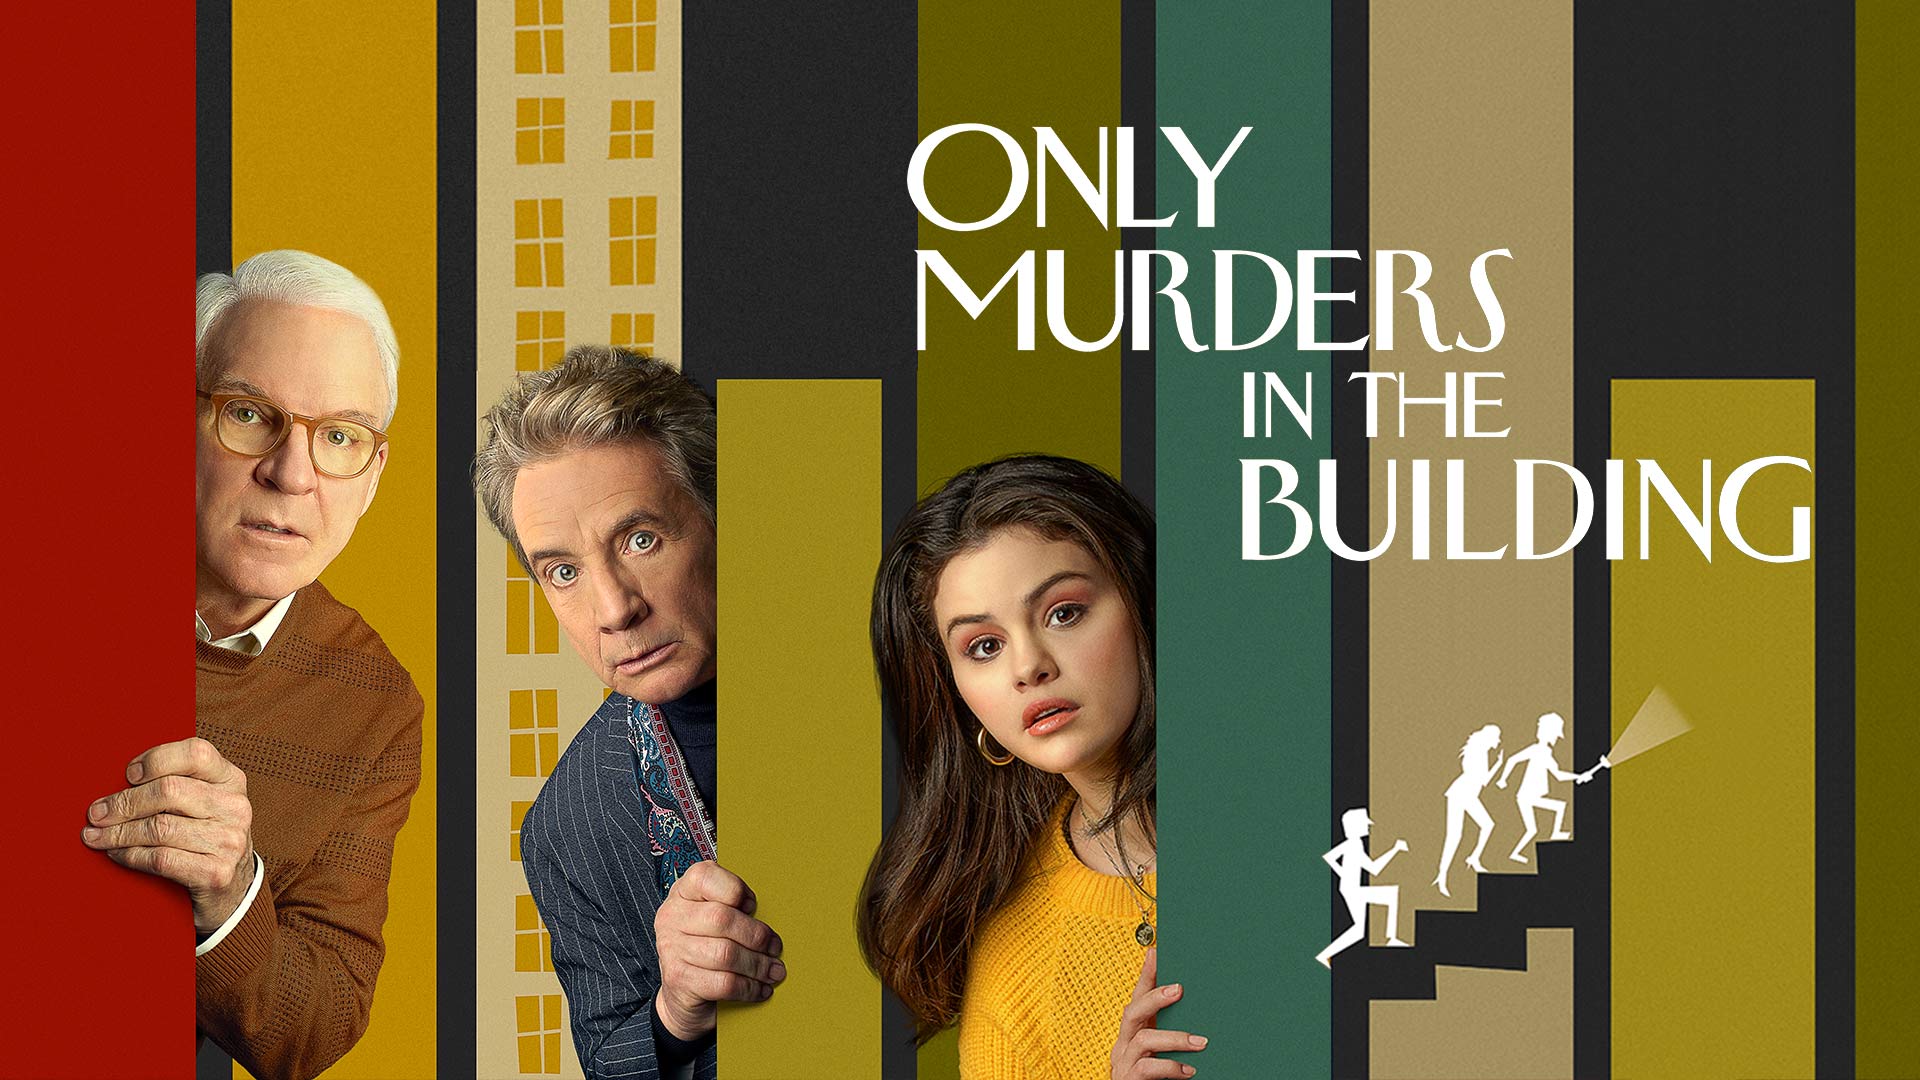 Only Murders in the Building Crime Series, now streaming on Disney+ Hotstar